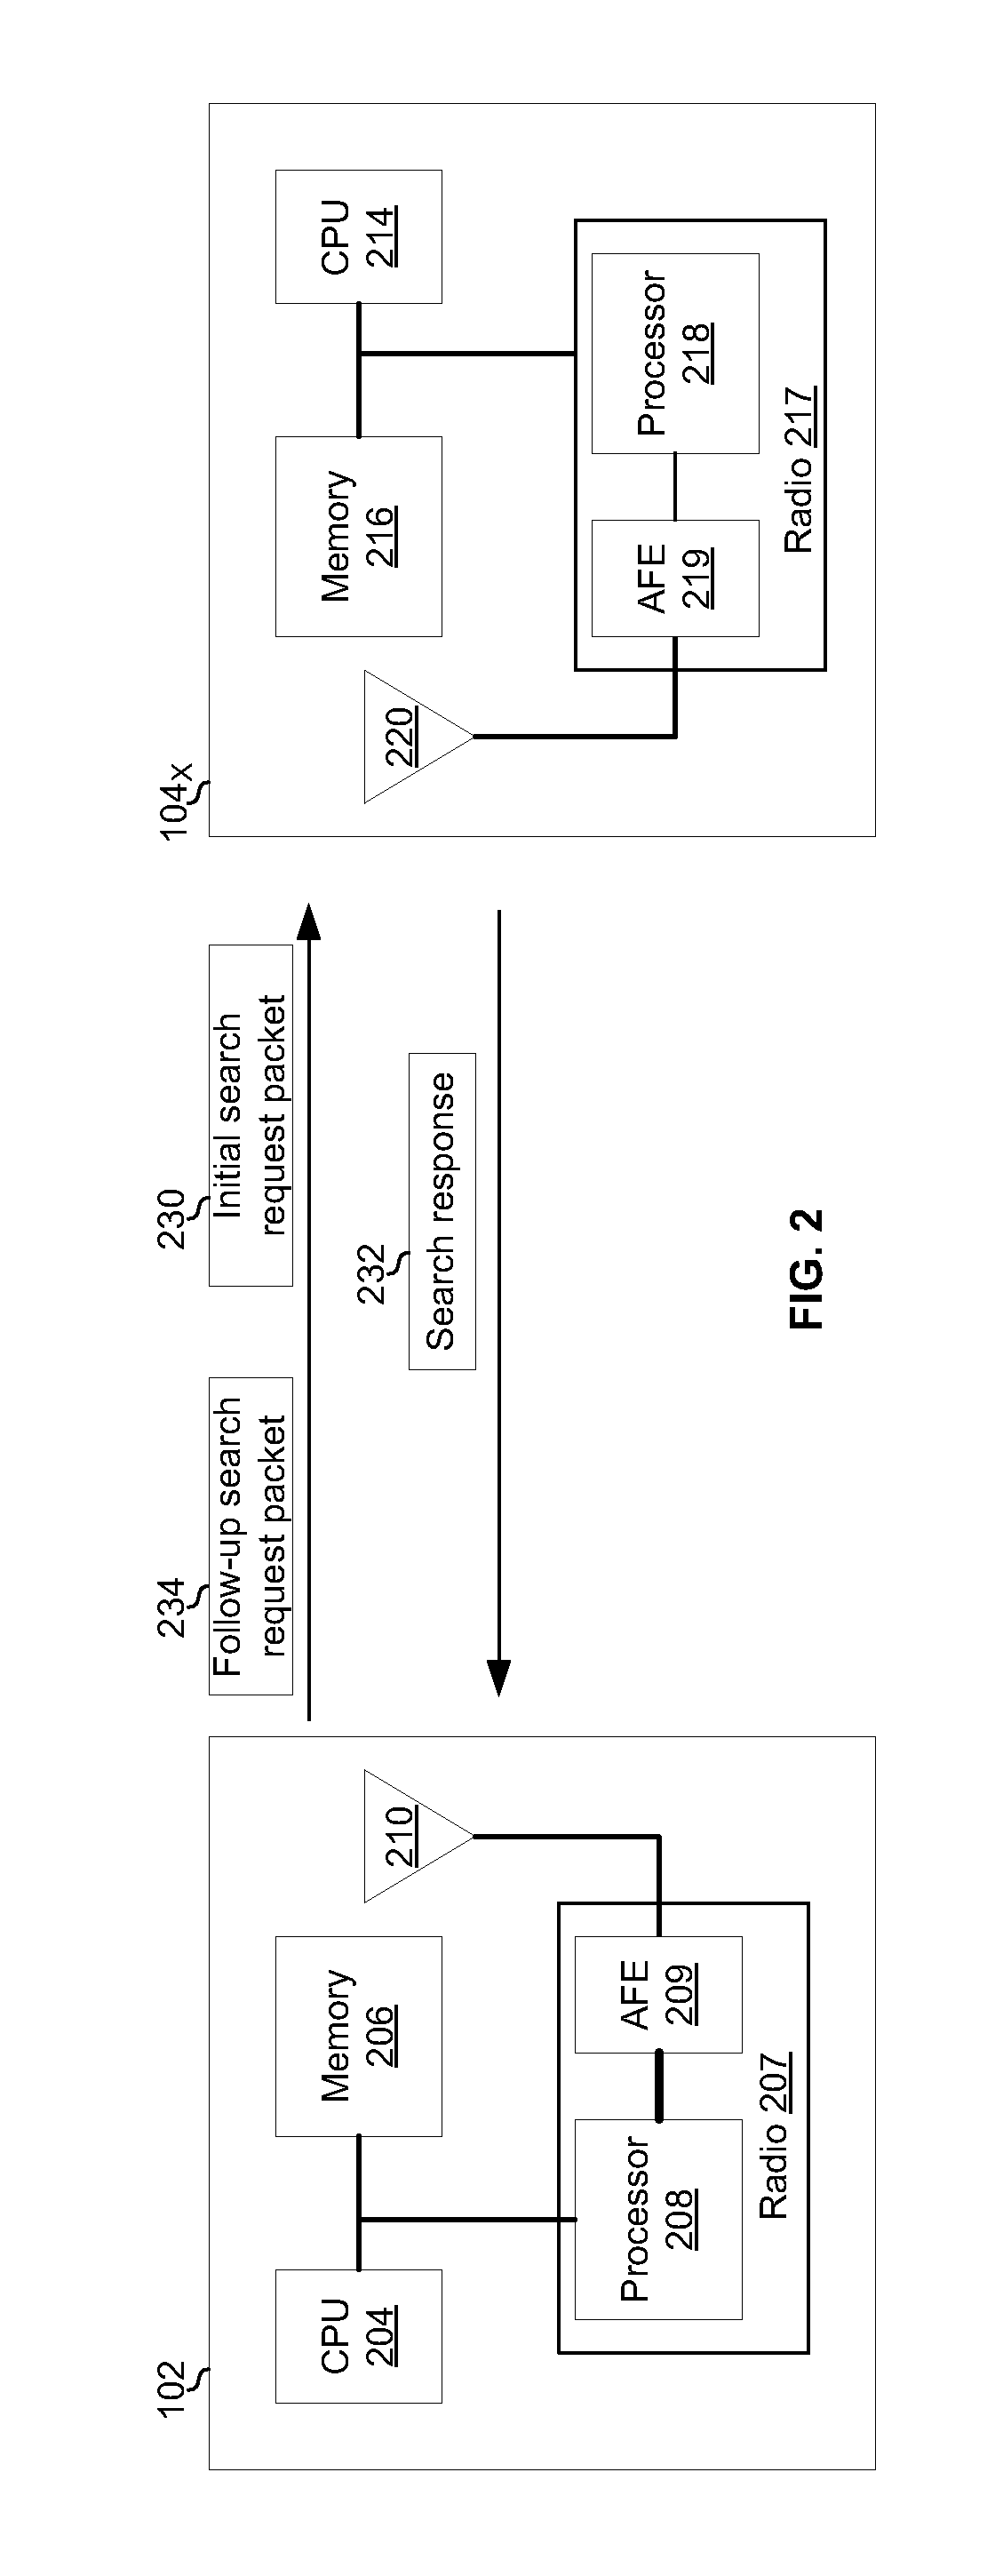 Method and Apparatus for Adaptive Searching of Distributed Datasets